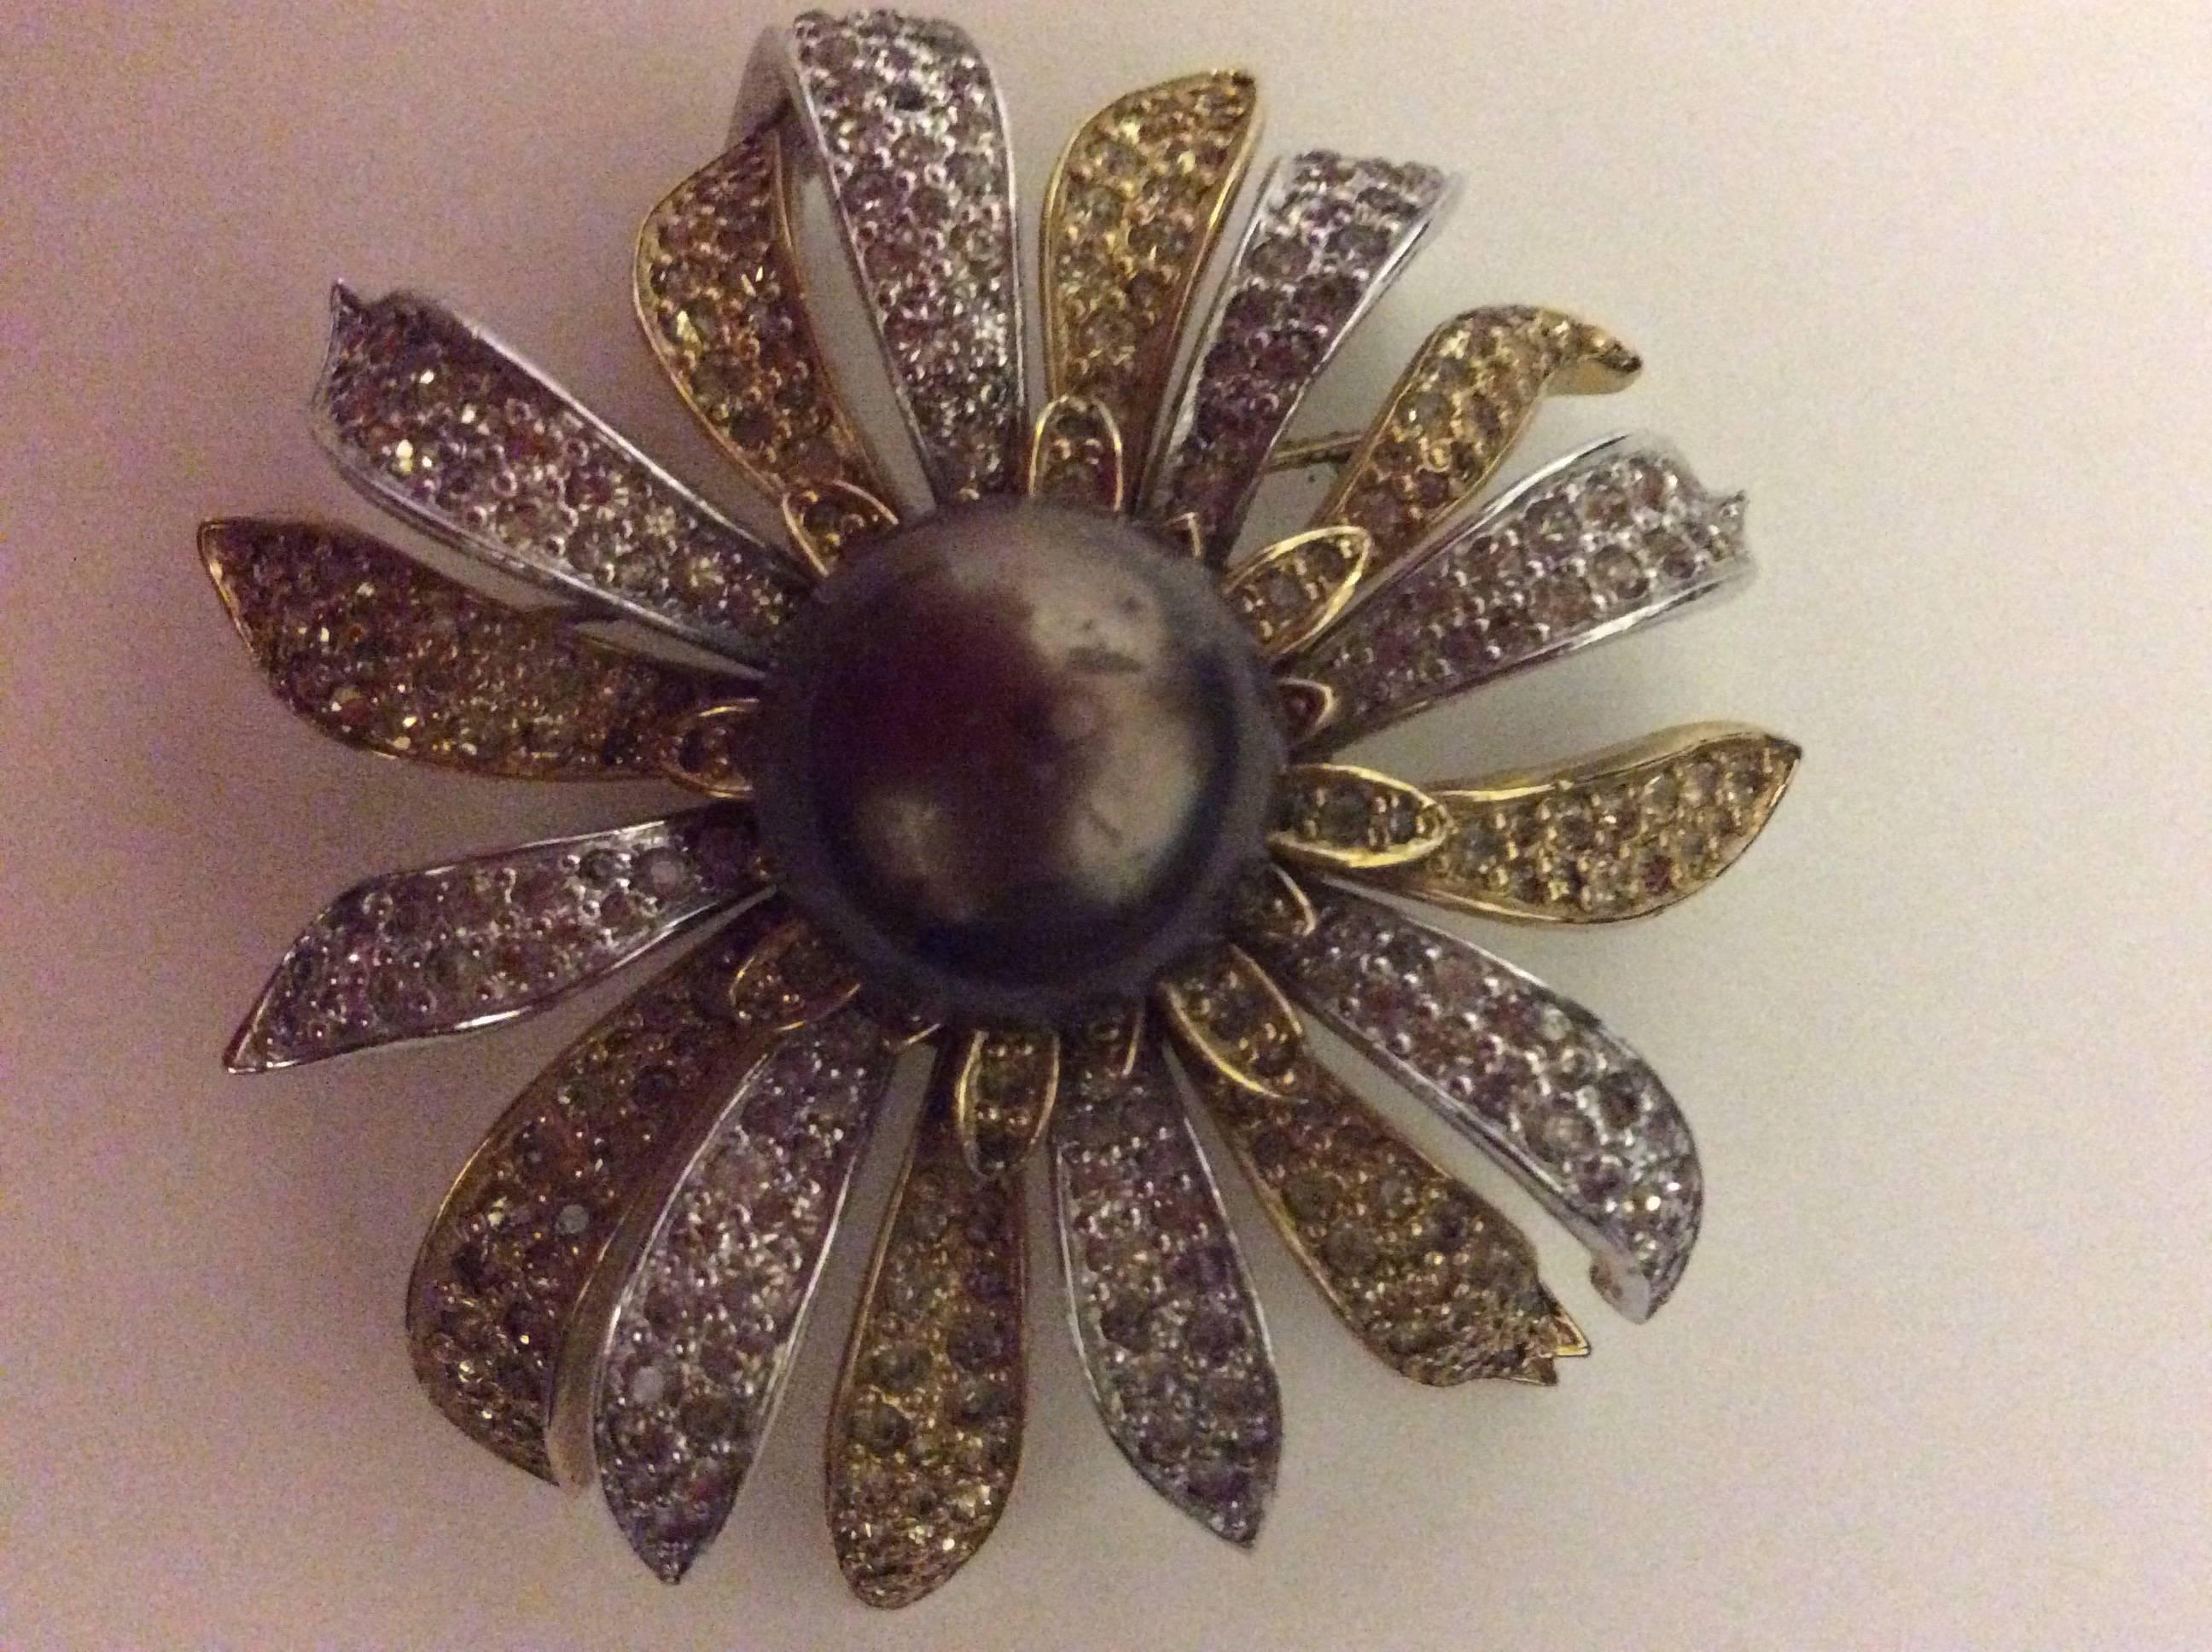 Presented here is a magnificent rare Nettie Rosenstein brooch from the late 1940's / early 1950's. This brooch reminds me of the Jean Schlumberger design work completed for Tiffany and Co. during his career. It is a beautiful brooch of a blooming